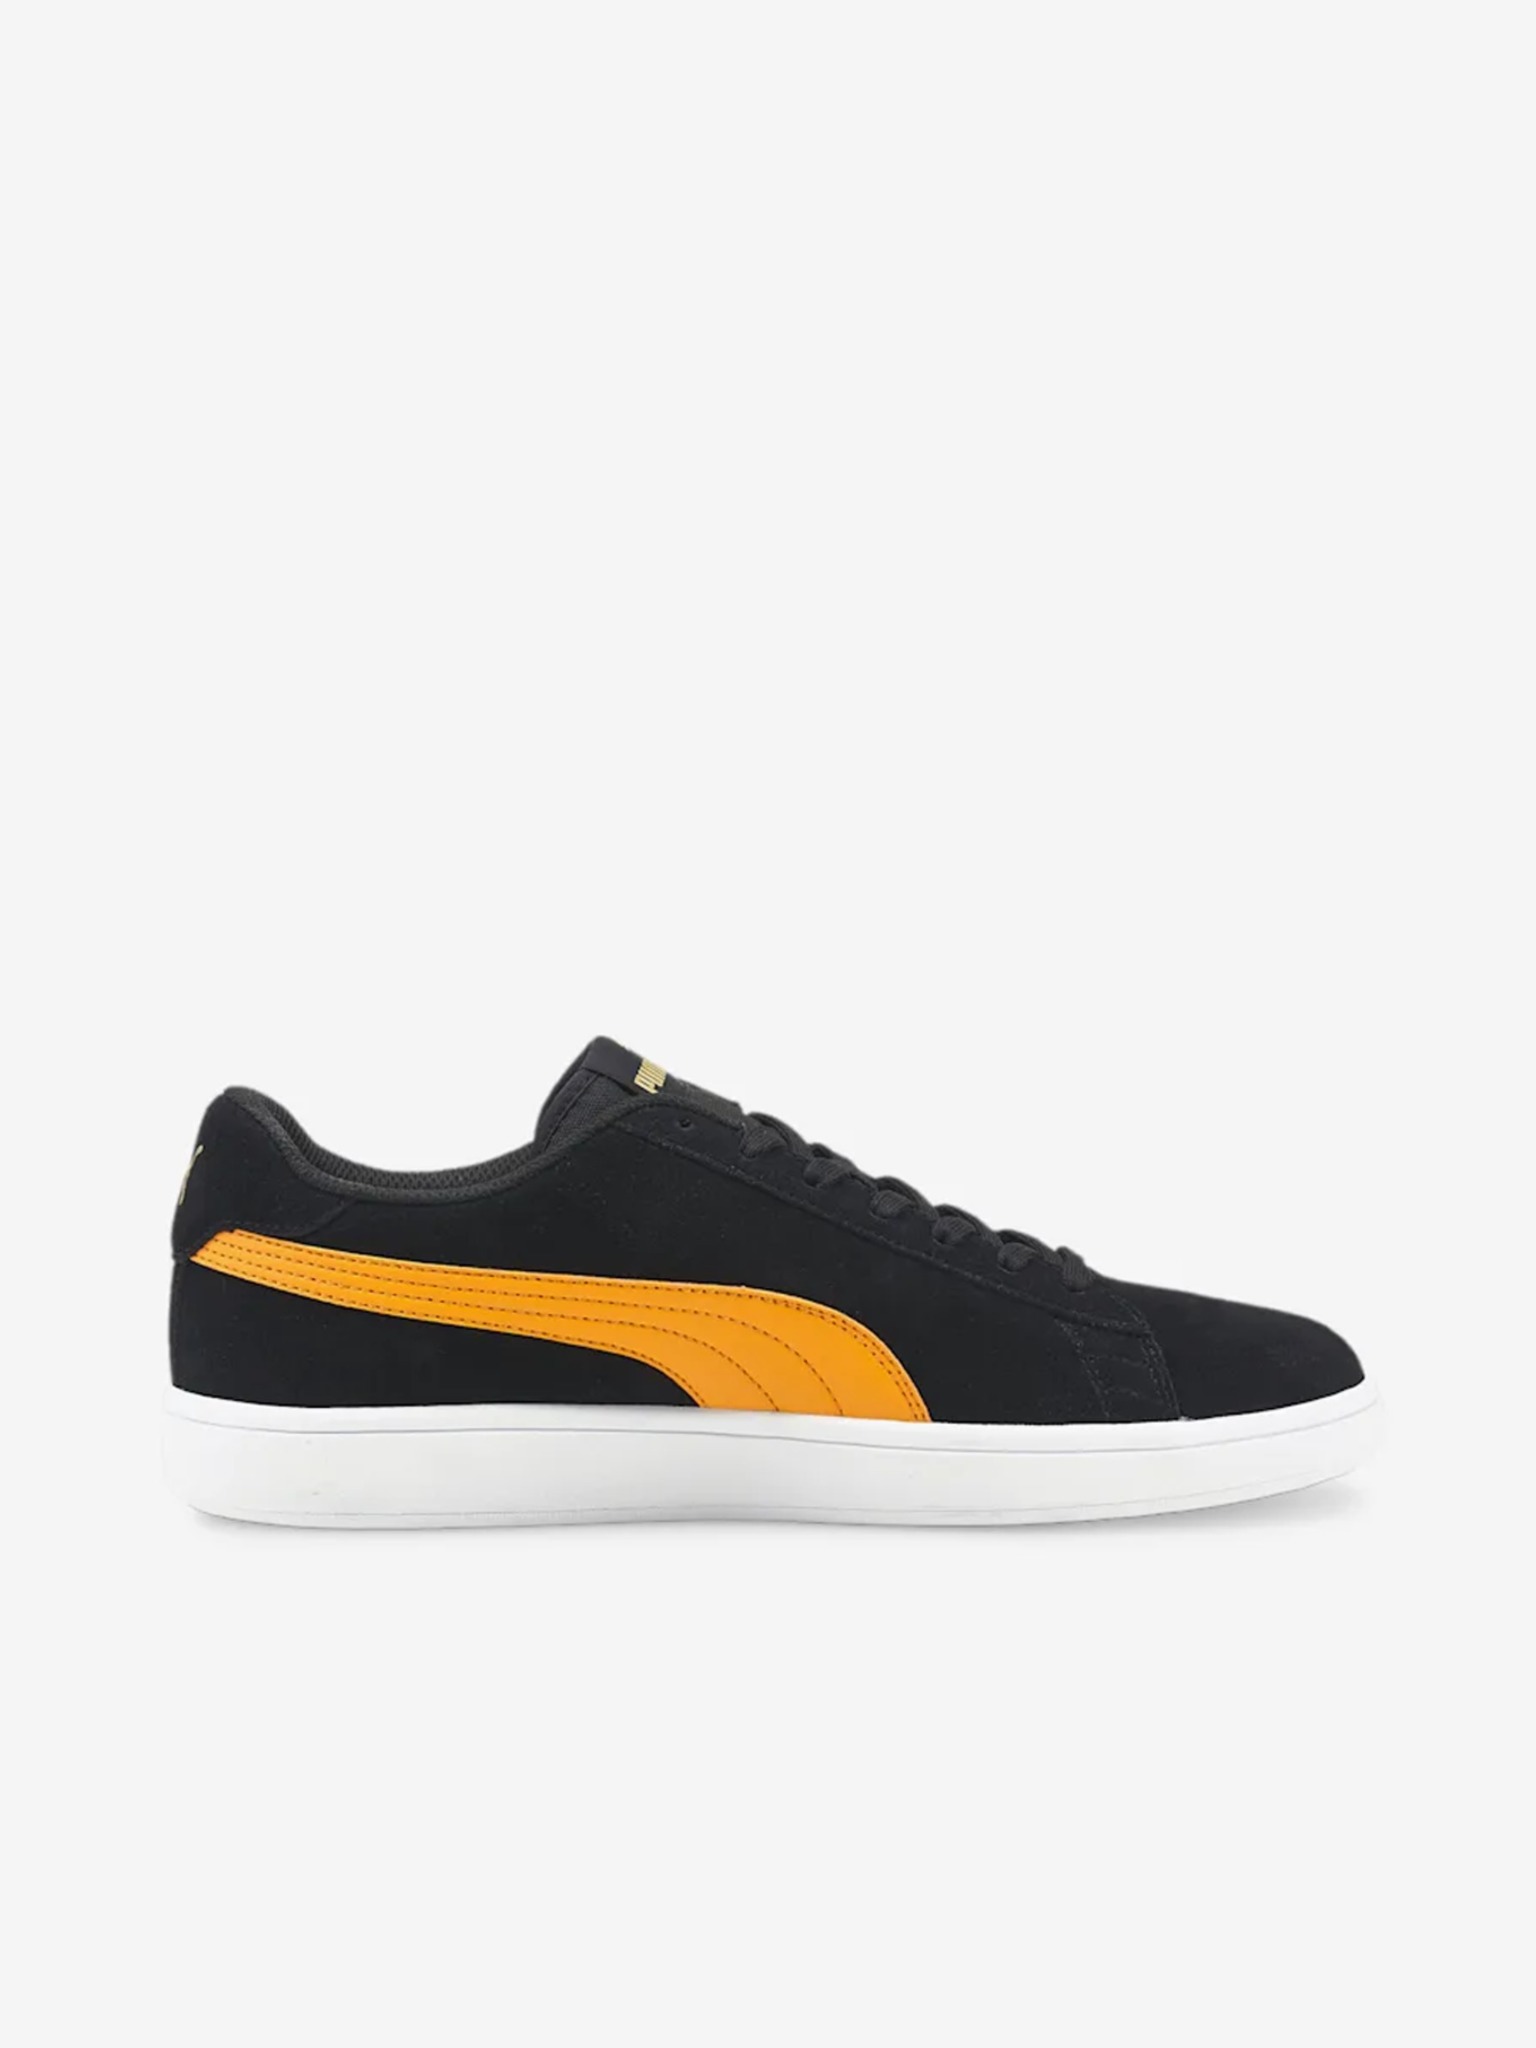 grey and yellow puma shoes